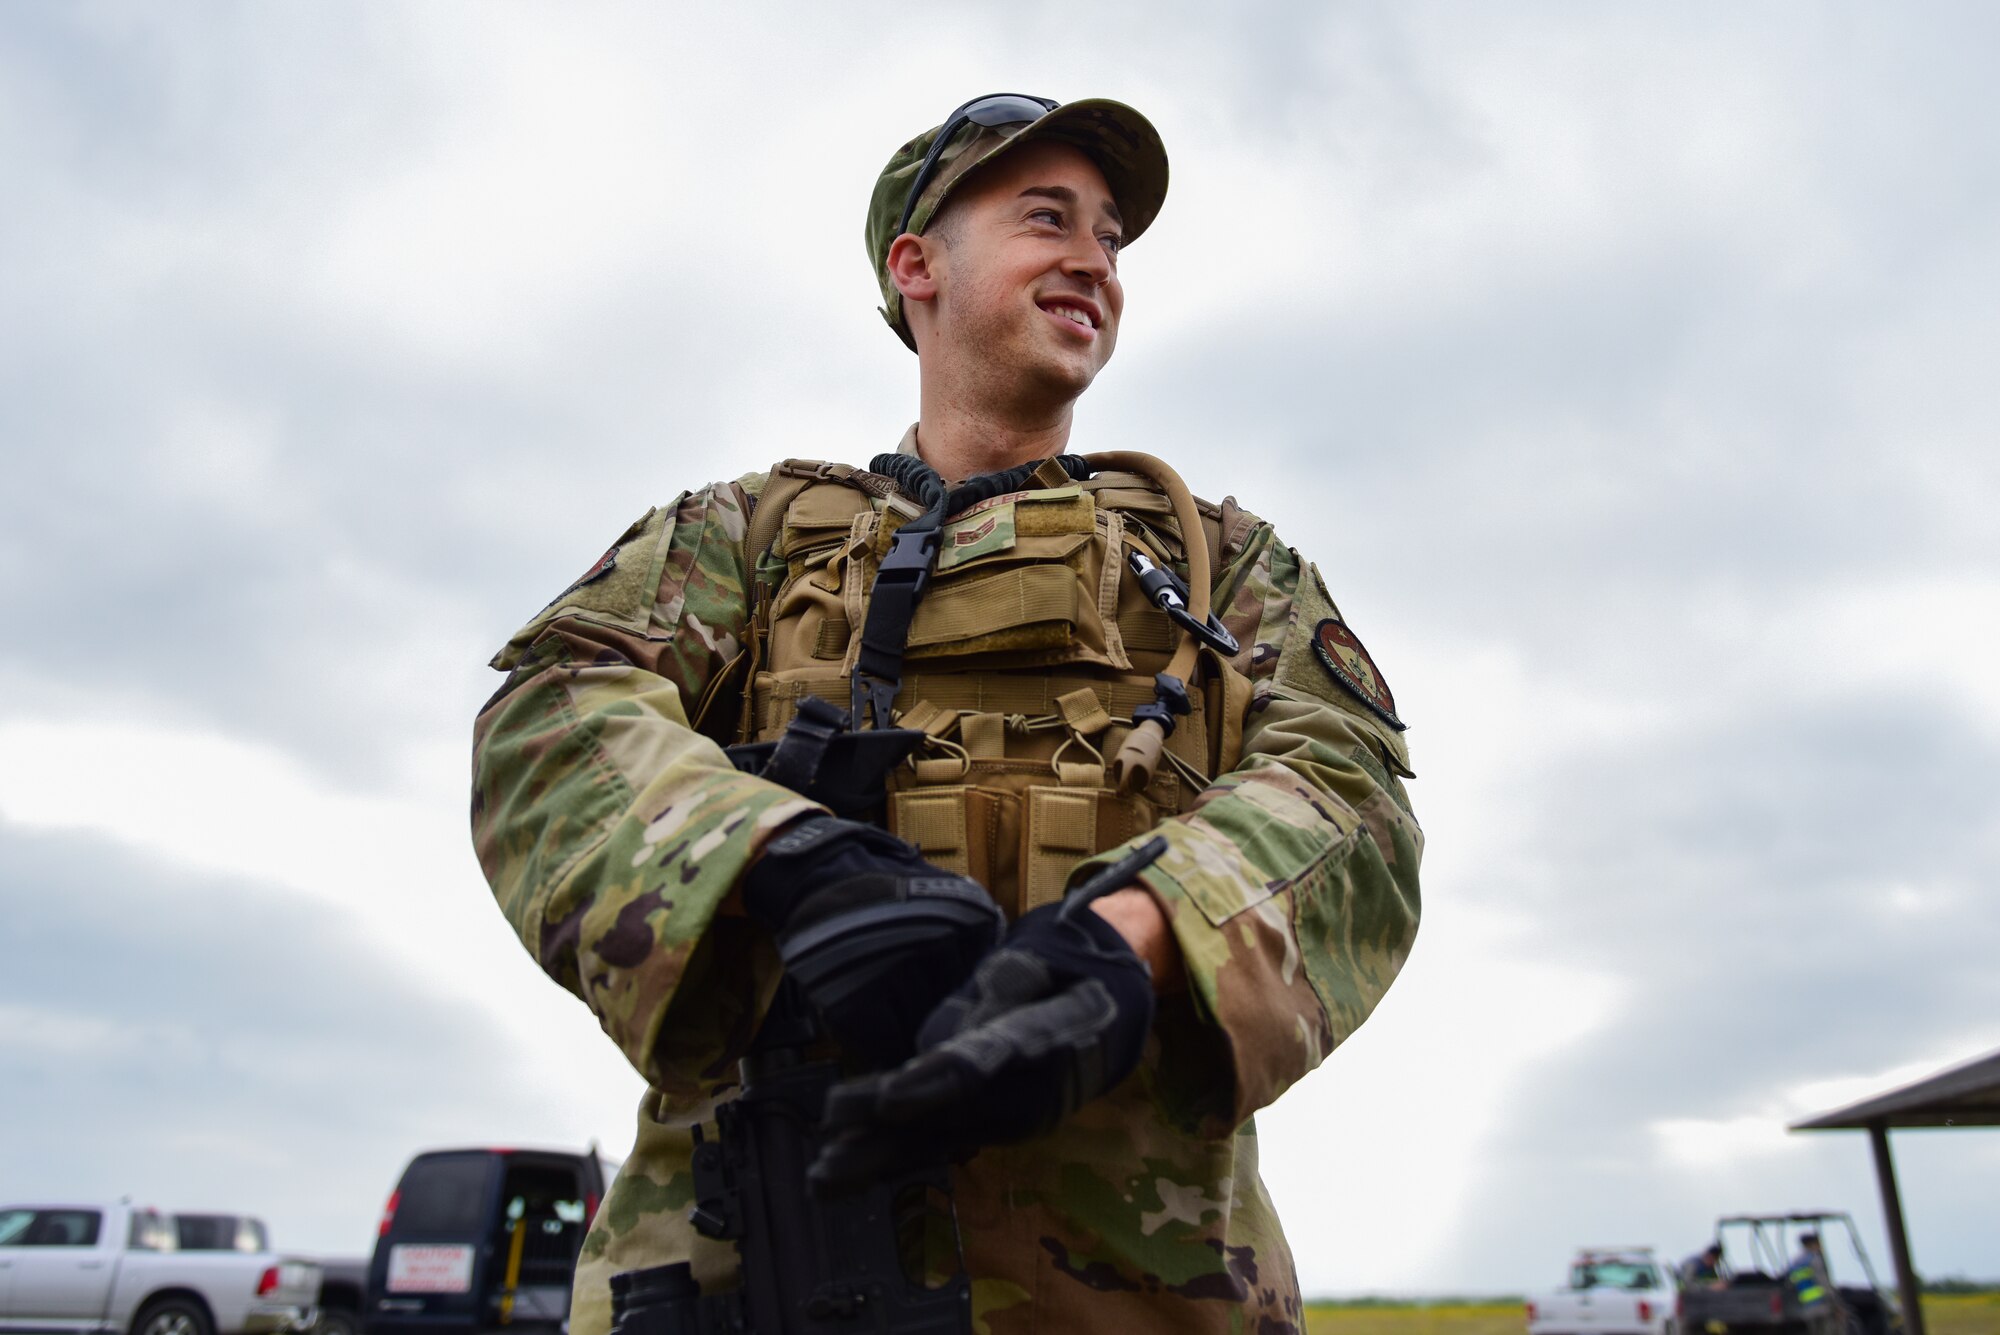 Staff Sgt. Nicholas Heckler, 47th Security Forces Squadron military working dog handler, prepares for a long day in the field at Laughlin Air Force Base, Texas, April 17, 2019. The 47th SFS changed up the tempo with an exercise that challenged their tactics, teamwork and physical fitness as they were put head to head with a simulated opposing force. (U.S. Air Force photo by Senior Airman Benjamin N. Valmoja)